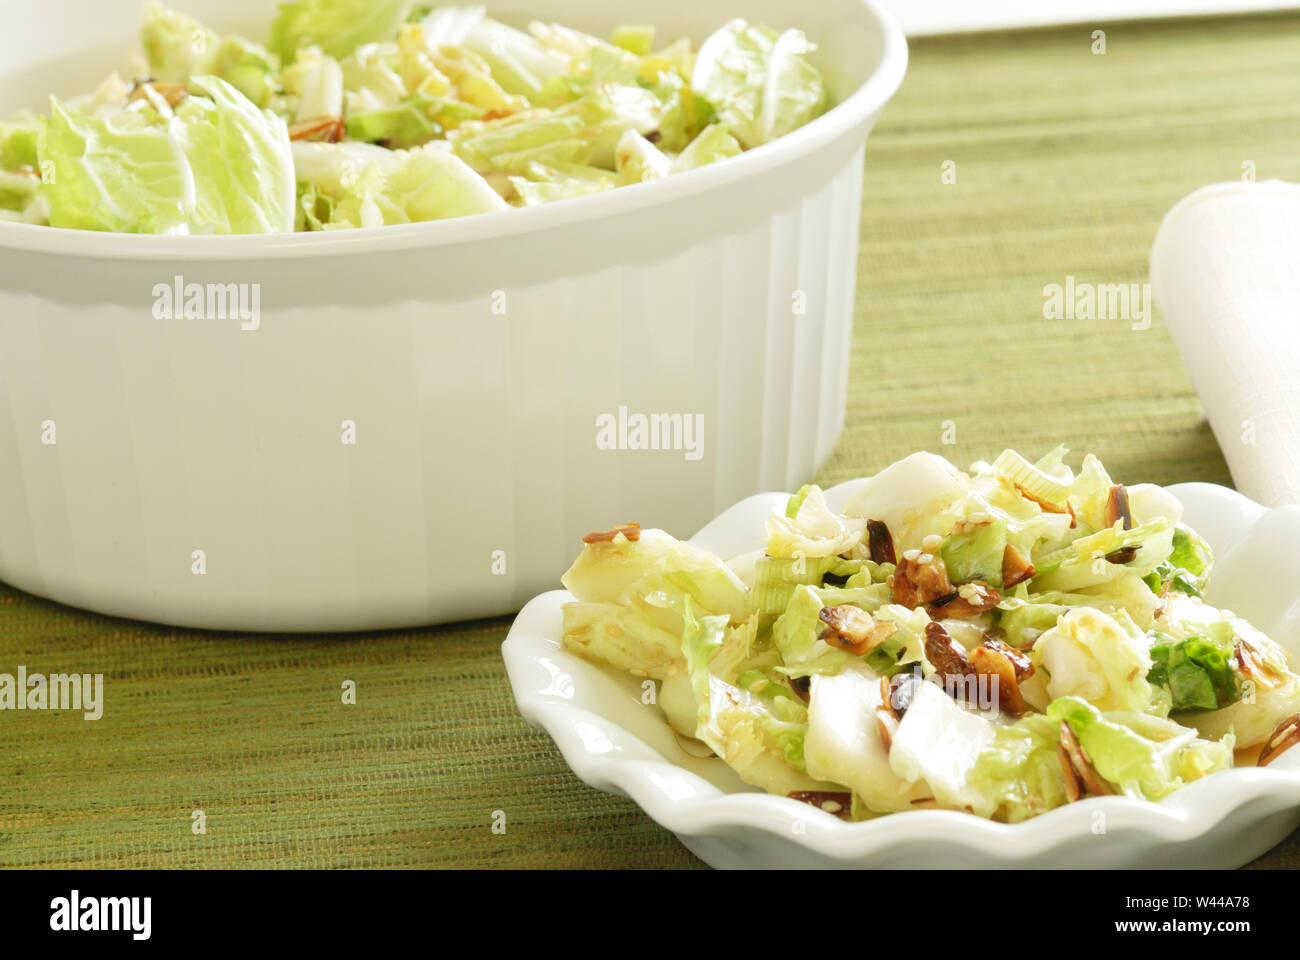 A bowl of coleslaw made from Napa cabbage and sprinkled with toasted sesame seeds and sliced almonds, with an individual serving in the foreground Stock Photo